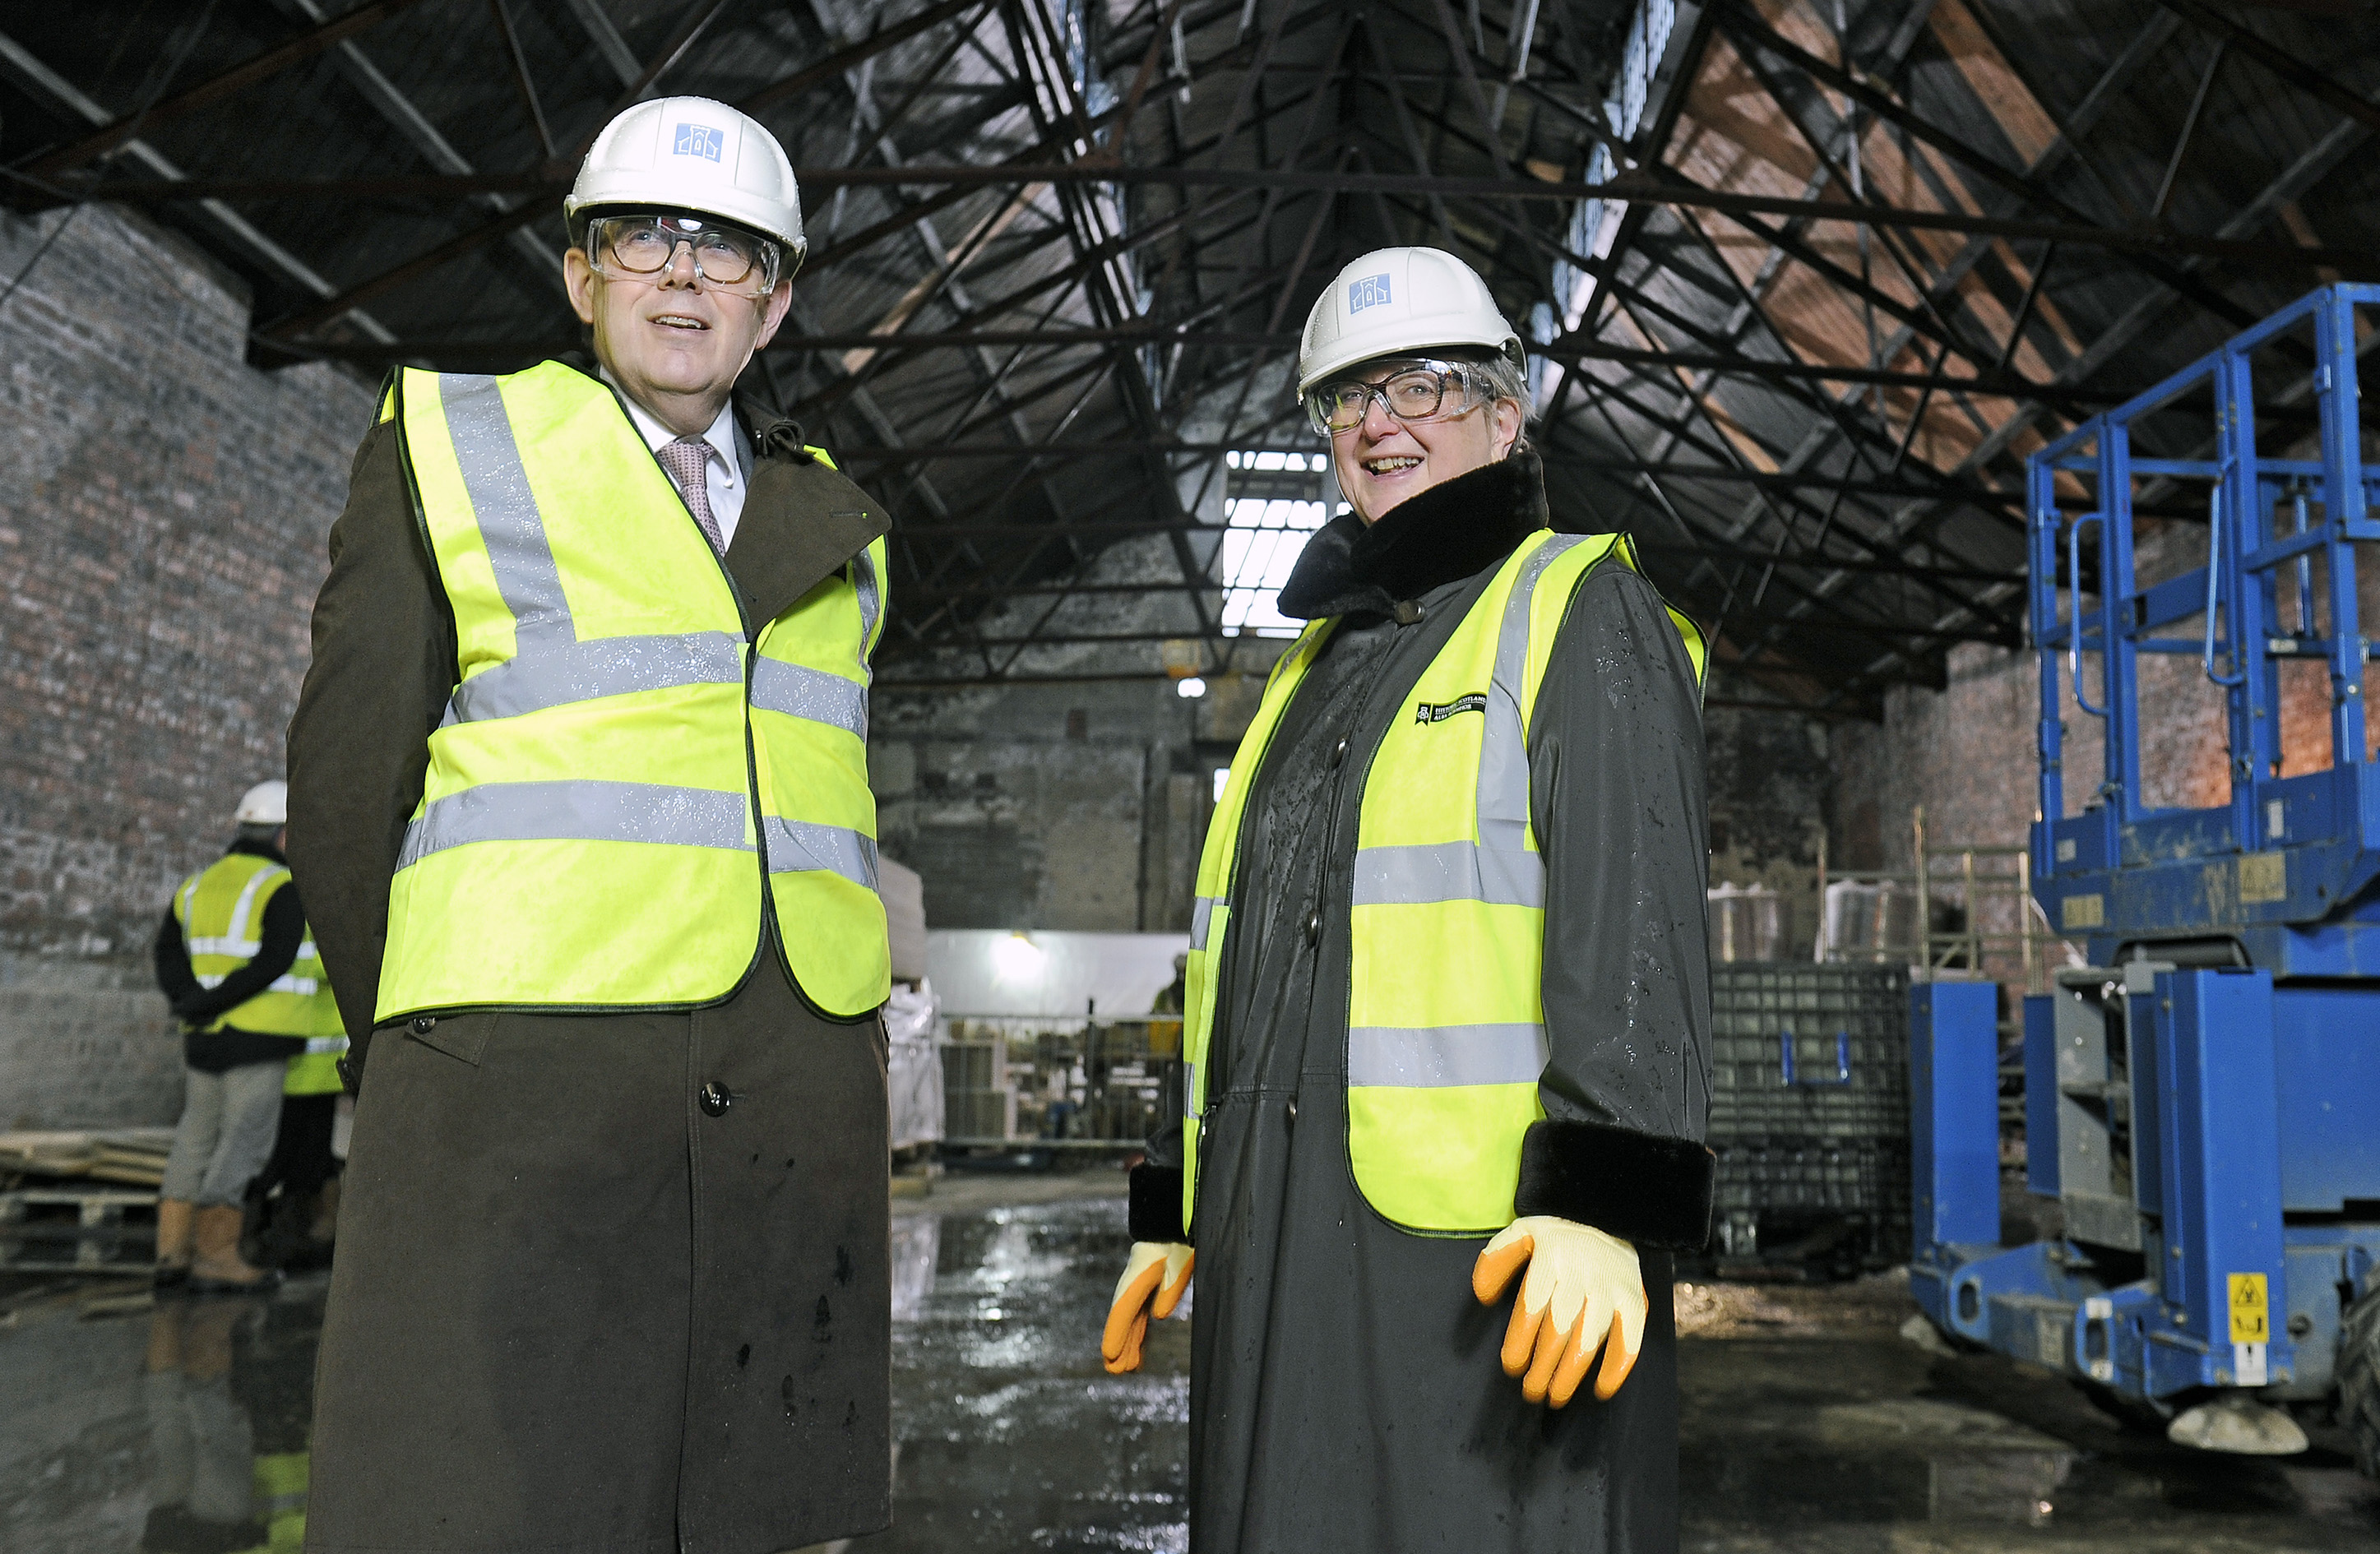  Sir Peter Luff, Chair of National Heritage Memorial Fund and Heritage Lottery Fund and Jane Ryder, Chair Historic Environment Scotland (HES) 